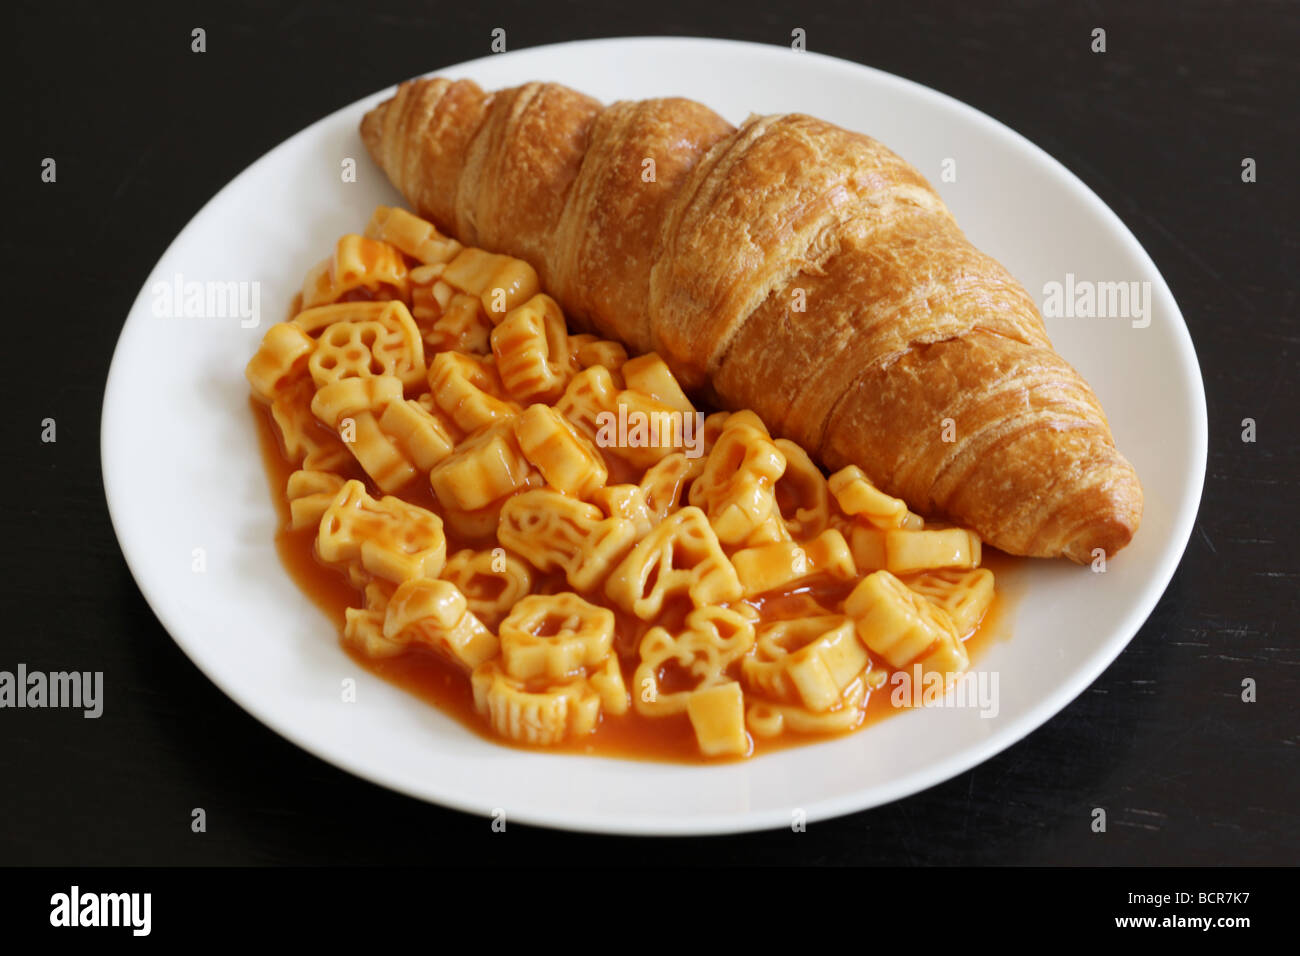 Freshly Baked Golden Croissant With Pasta Shapes In Tomato Sauce Meal With No People Stock Photo